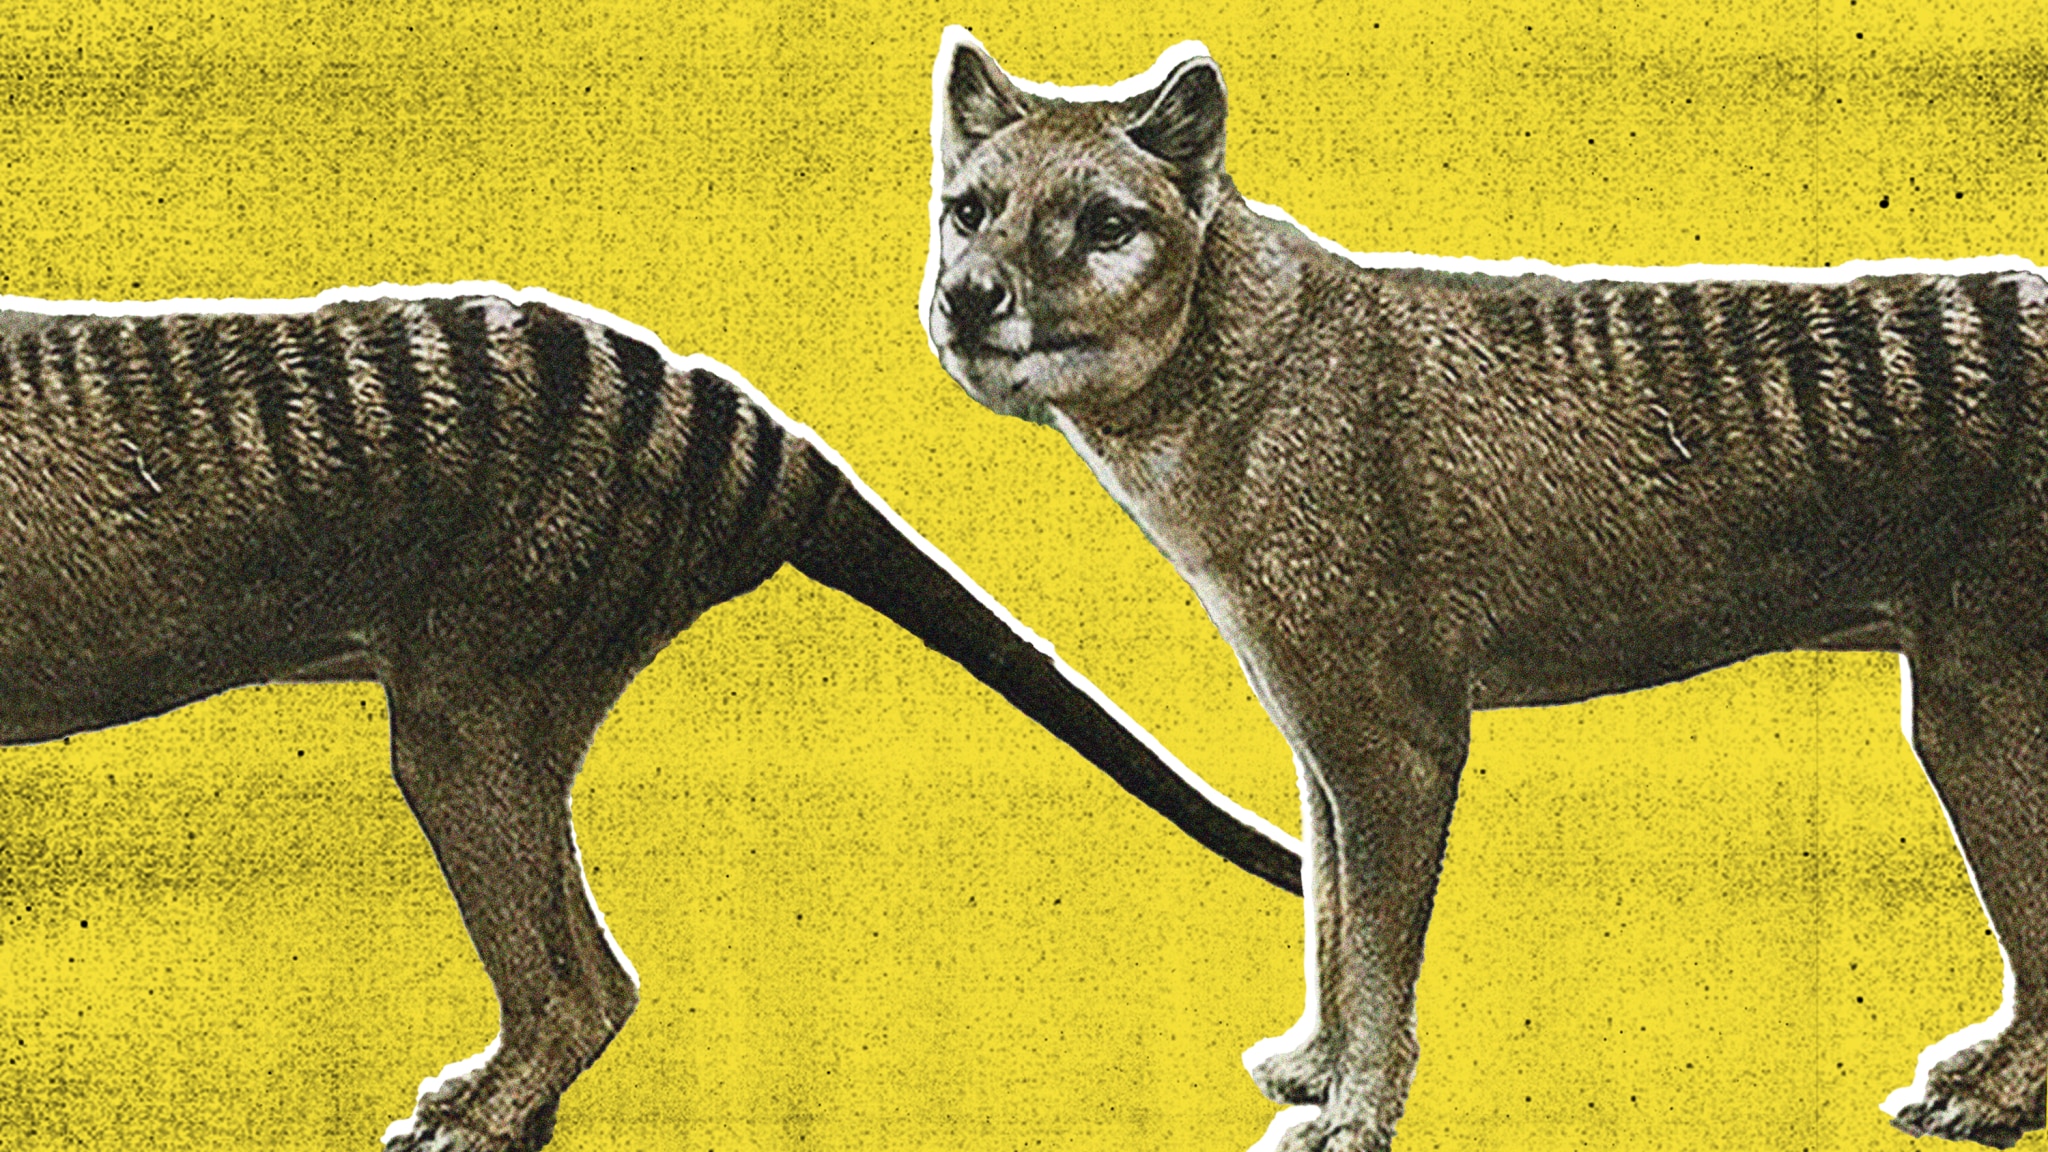 Mystery of the last missing Tasmanian Tiger: solved